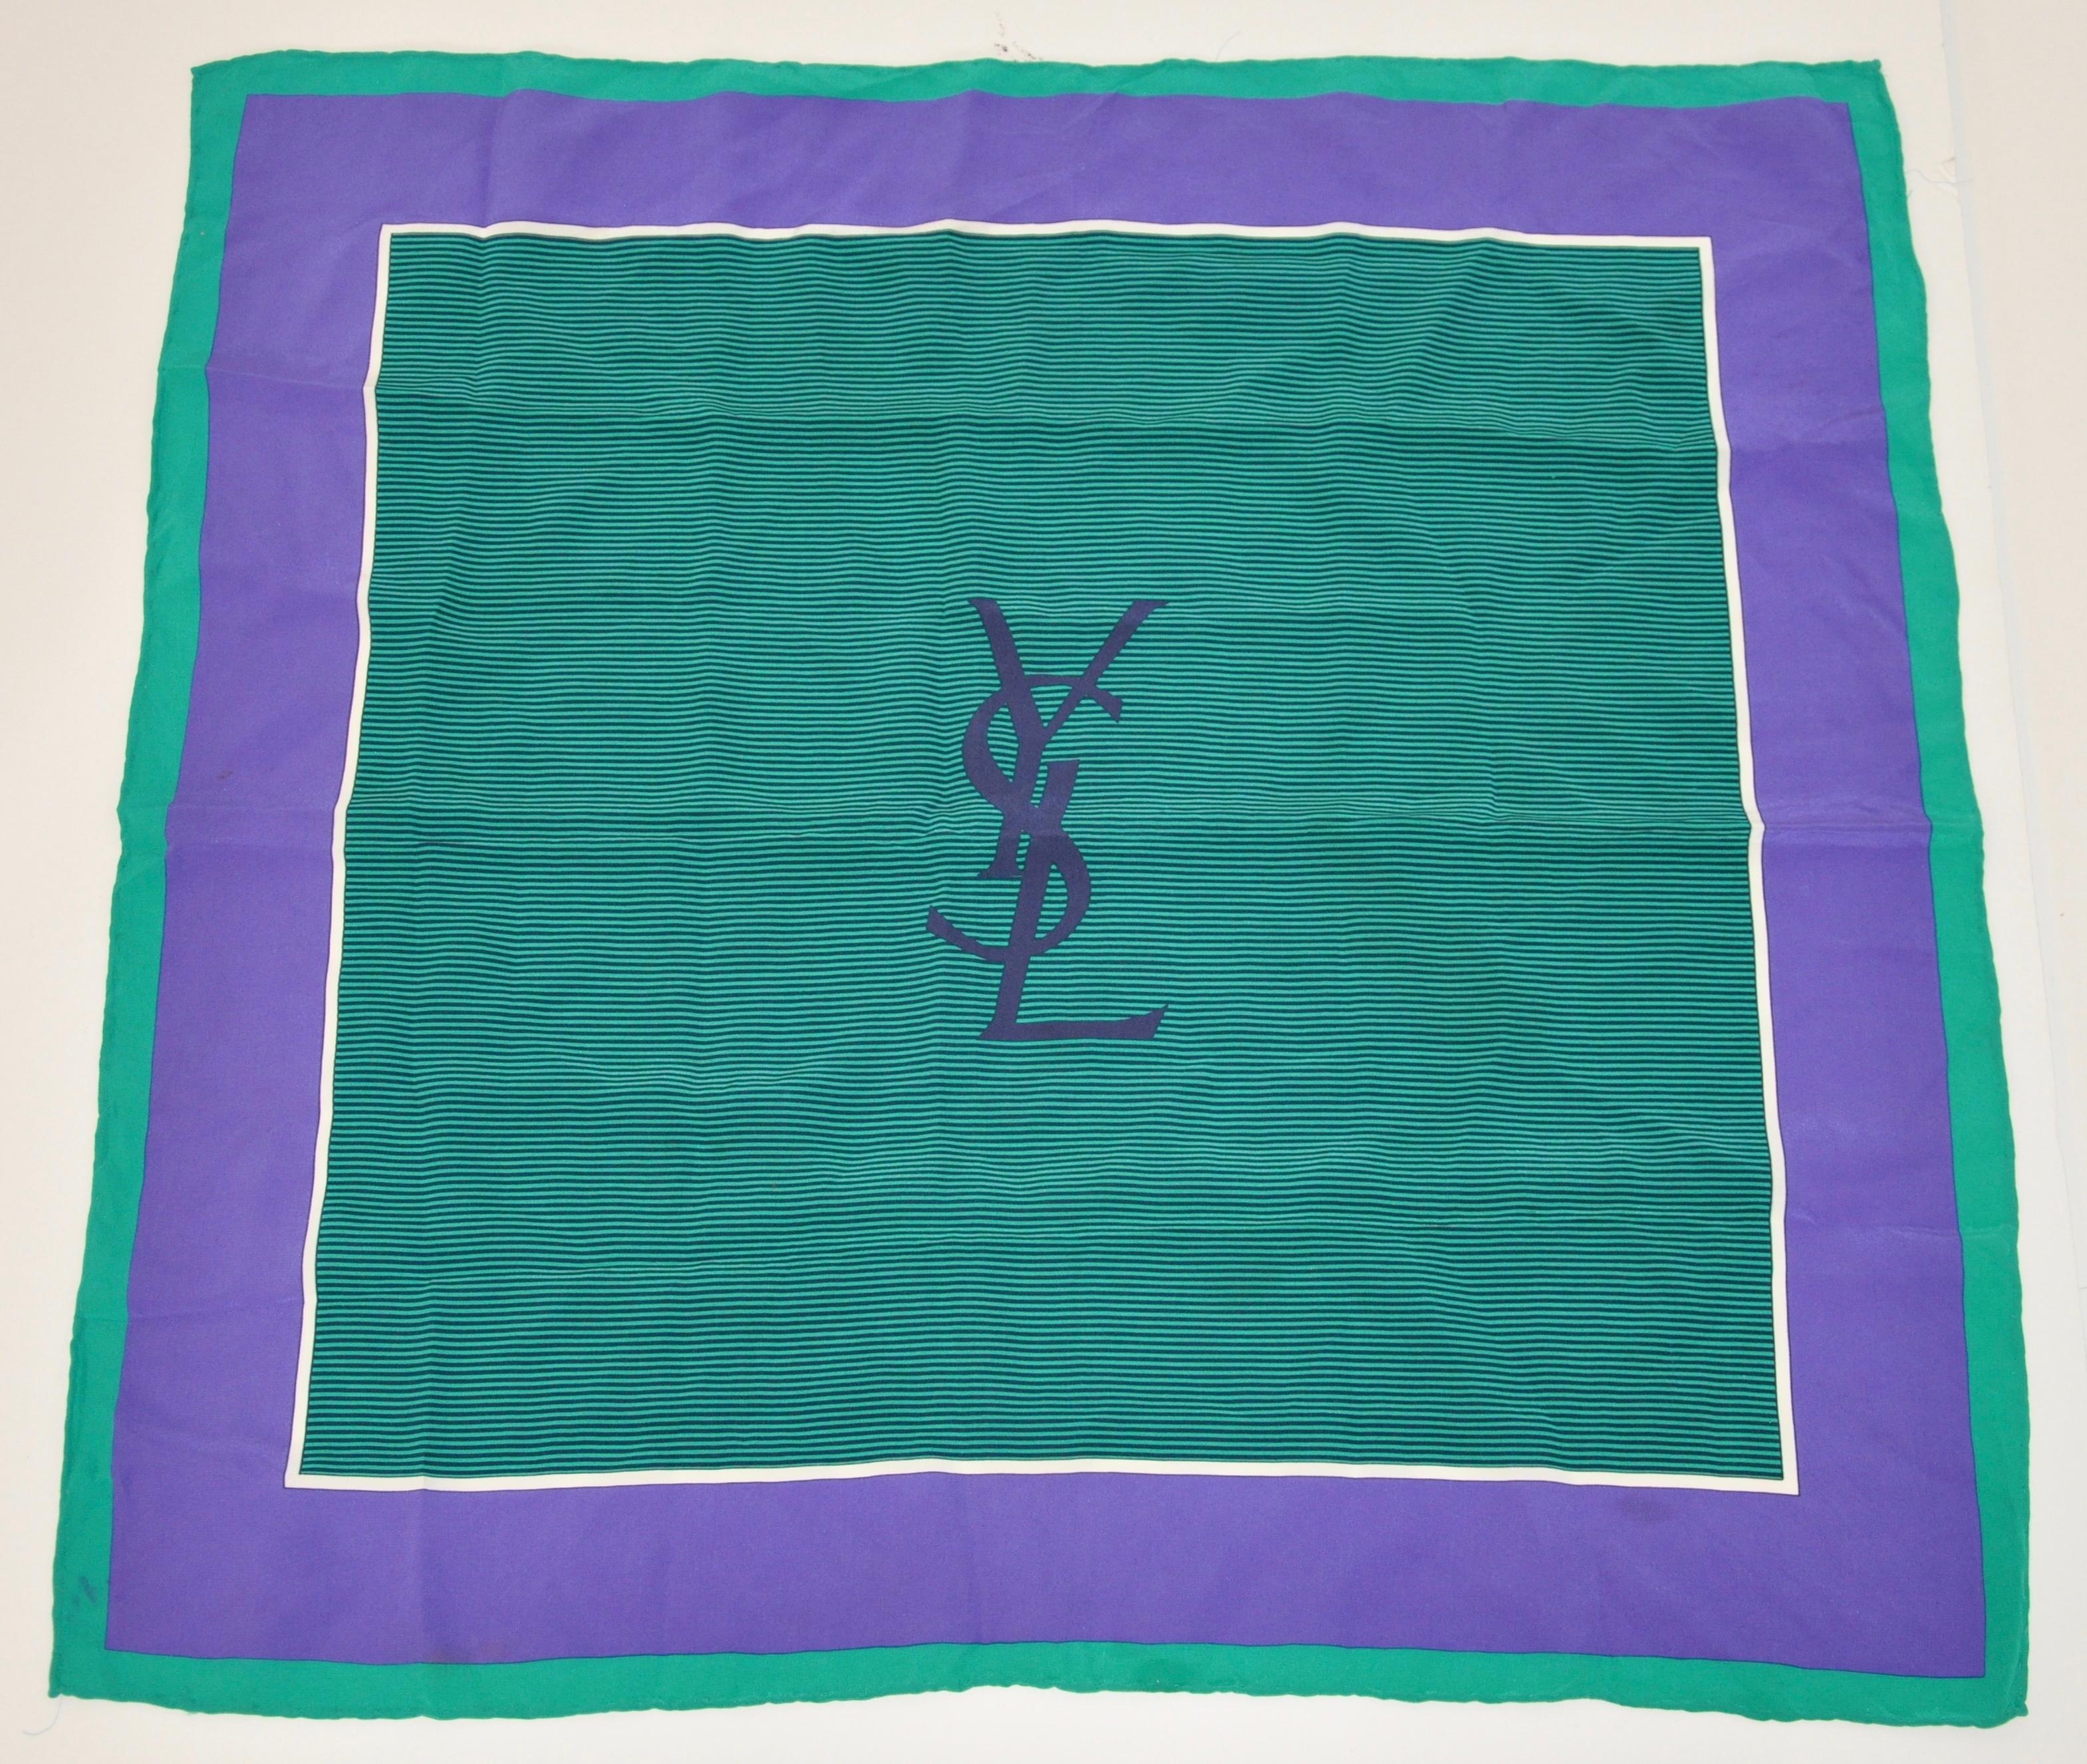        Yves Saint Laurent signature deep lavender and green border silk scarf with hand-rolled edges measures 24 inches by 25 inches. Made in France.